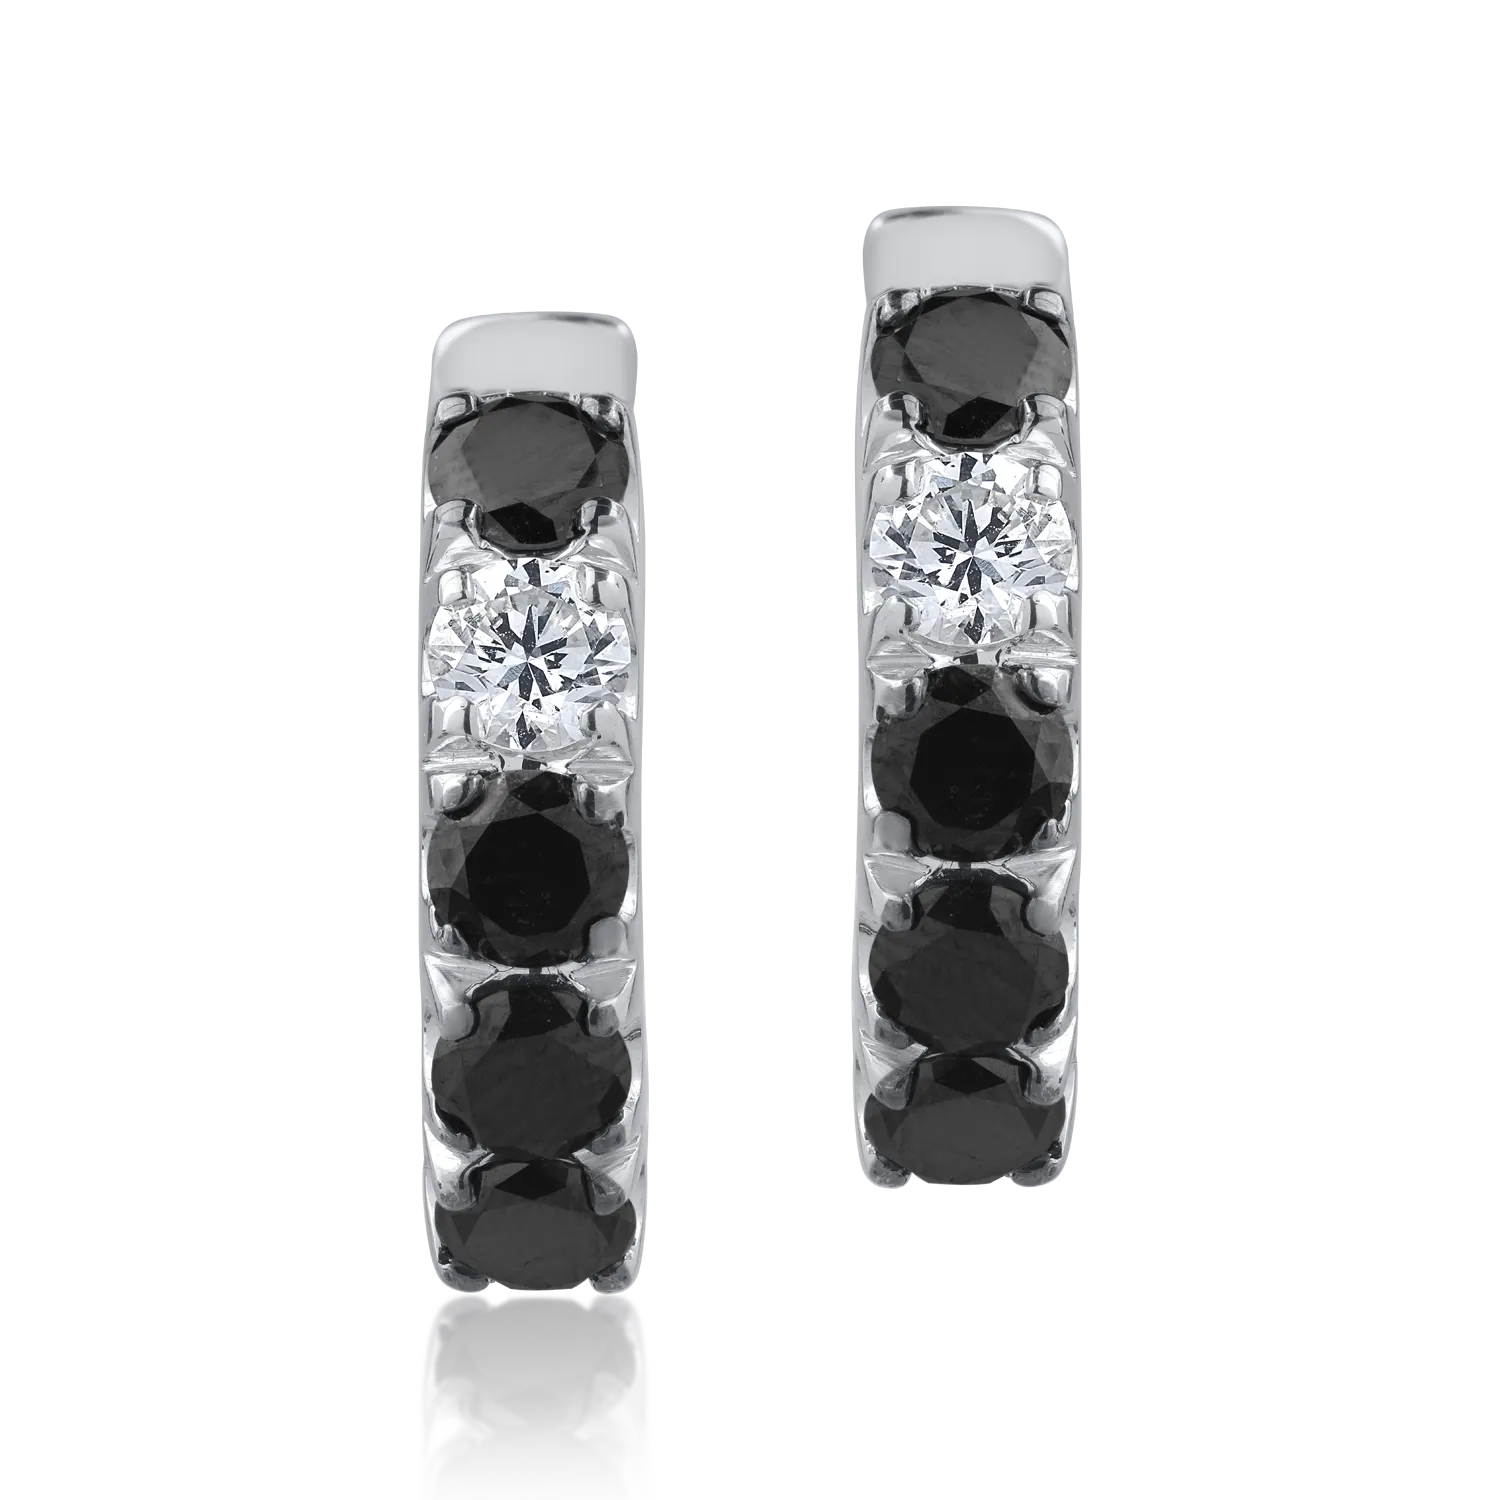 18K white gold earrings with 0.44ct clear diamonds and 1.68ct black diamonds